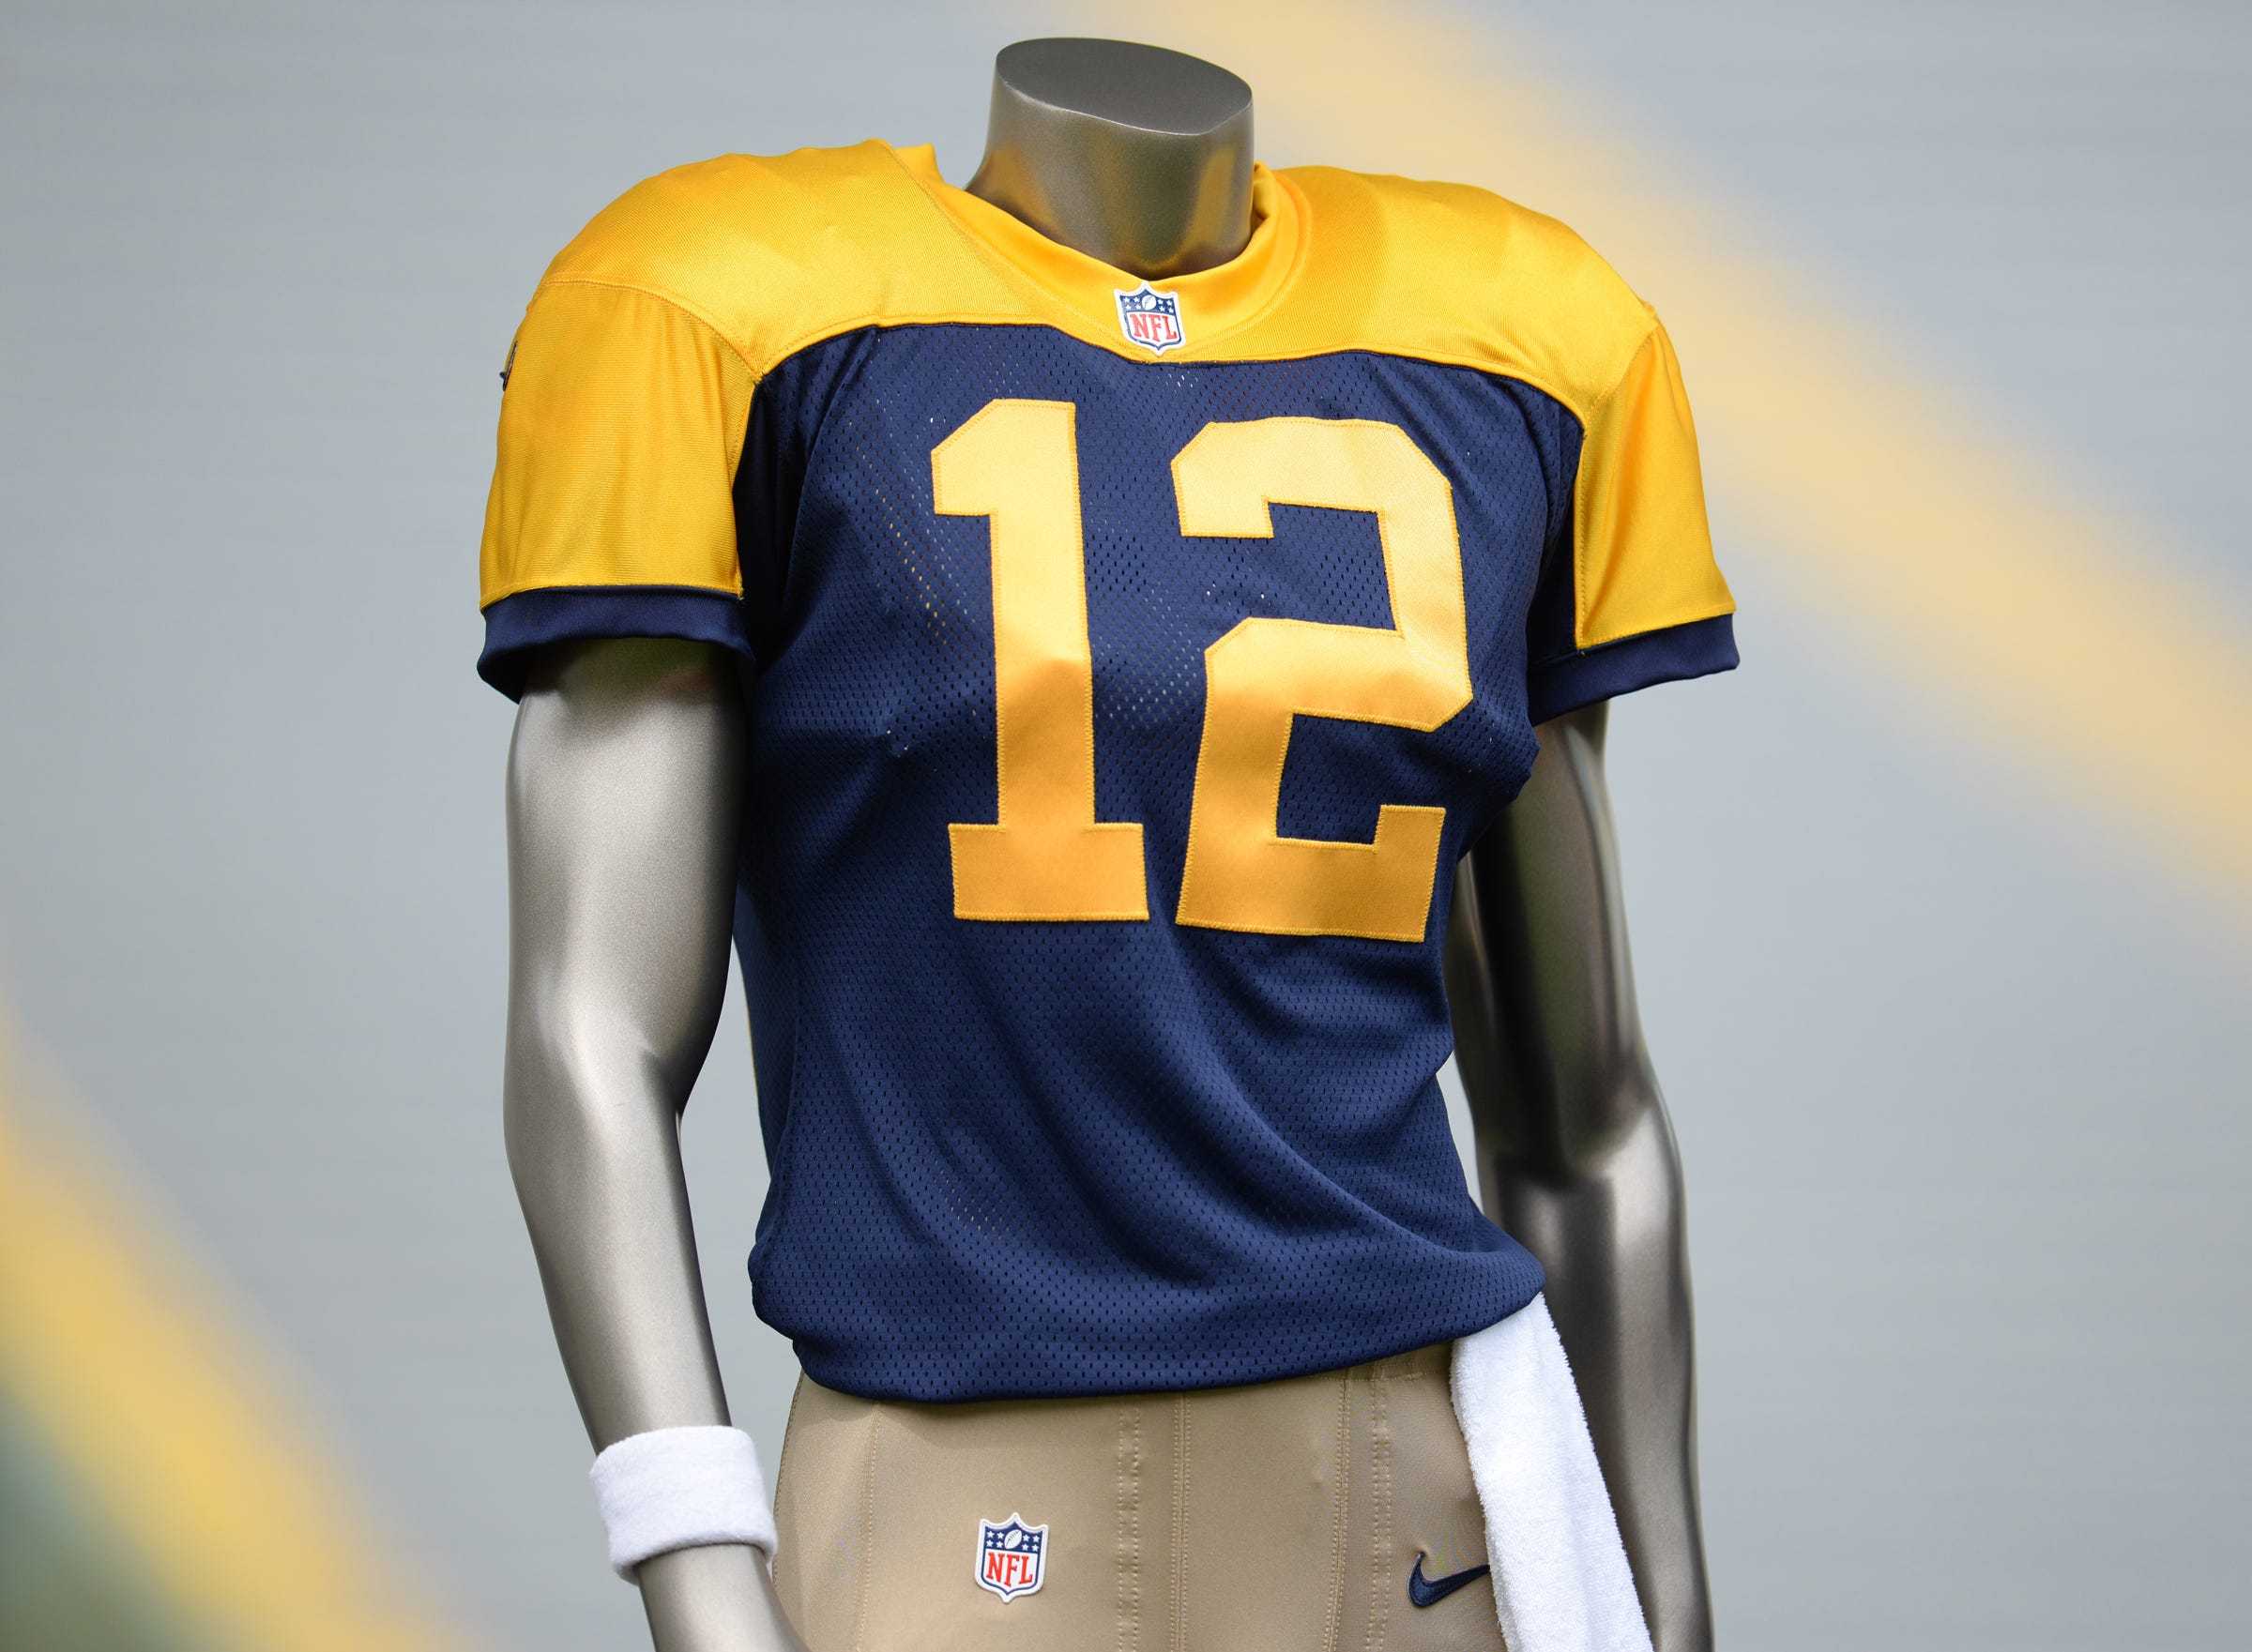 acme packers jersey